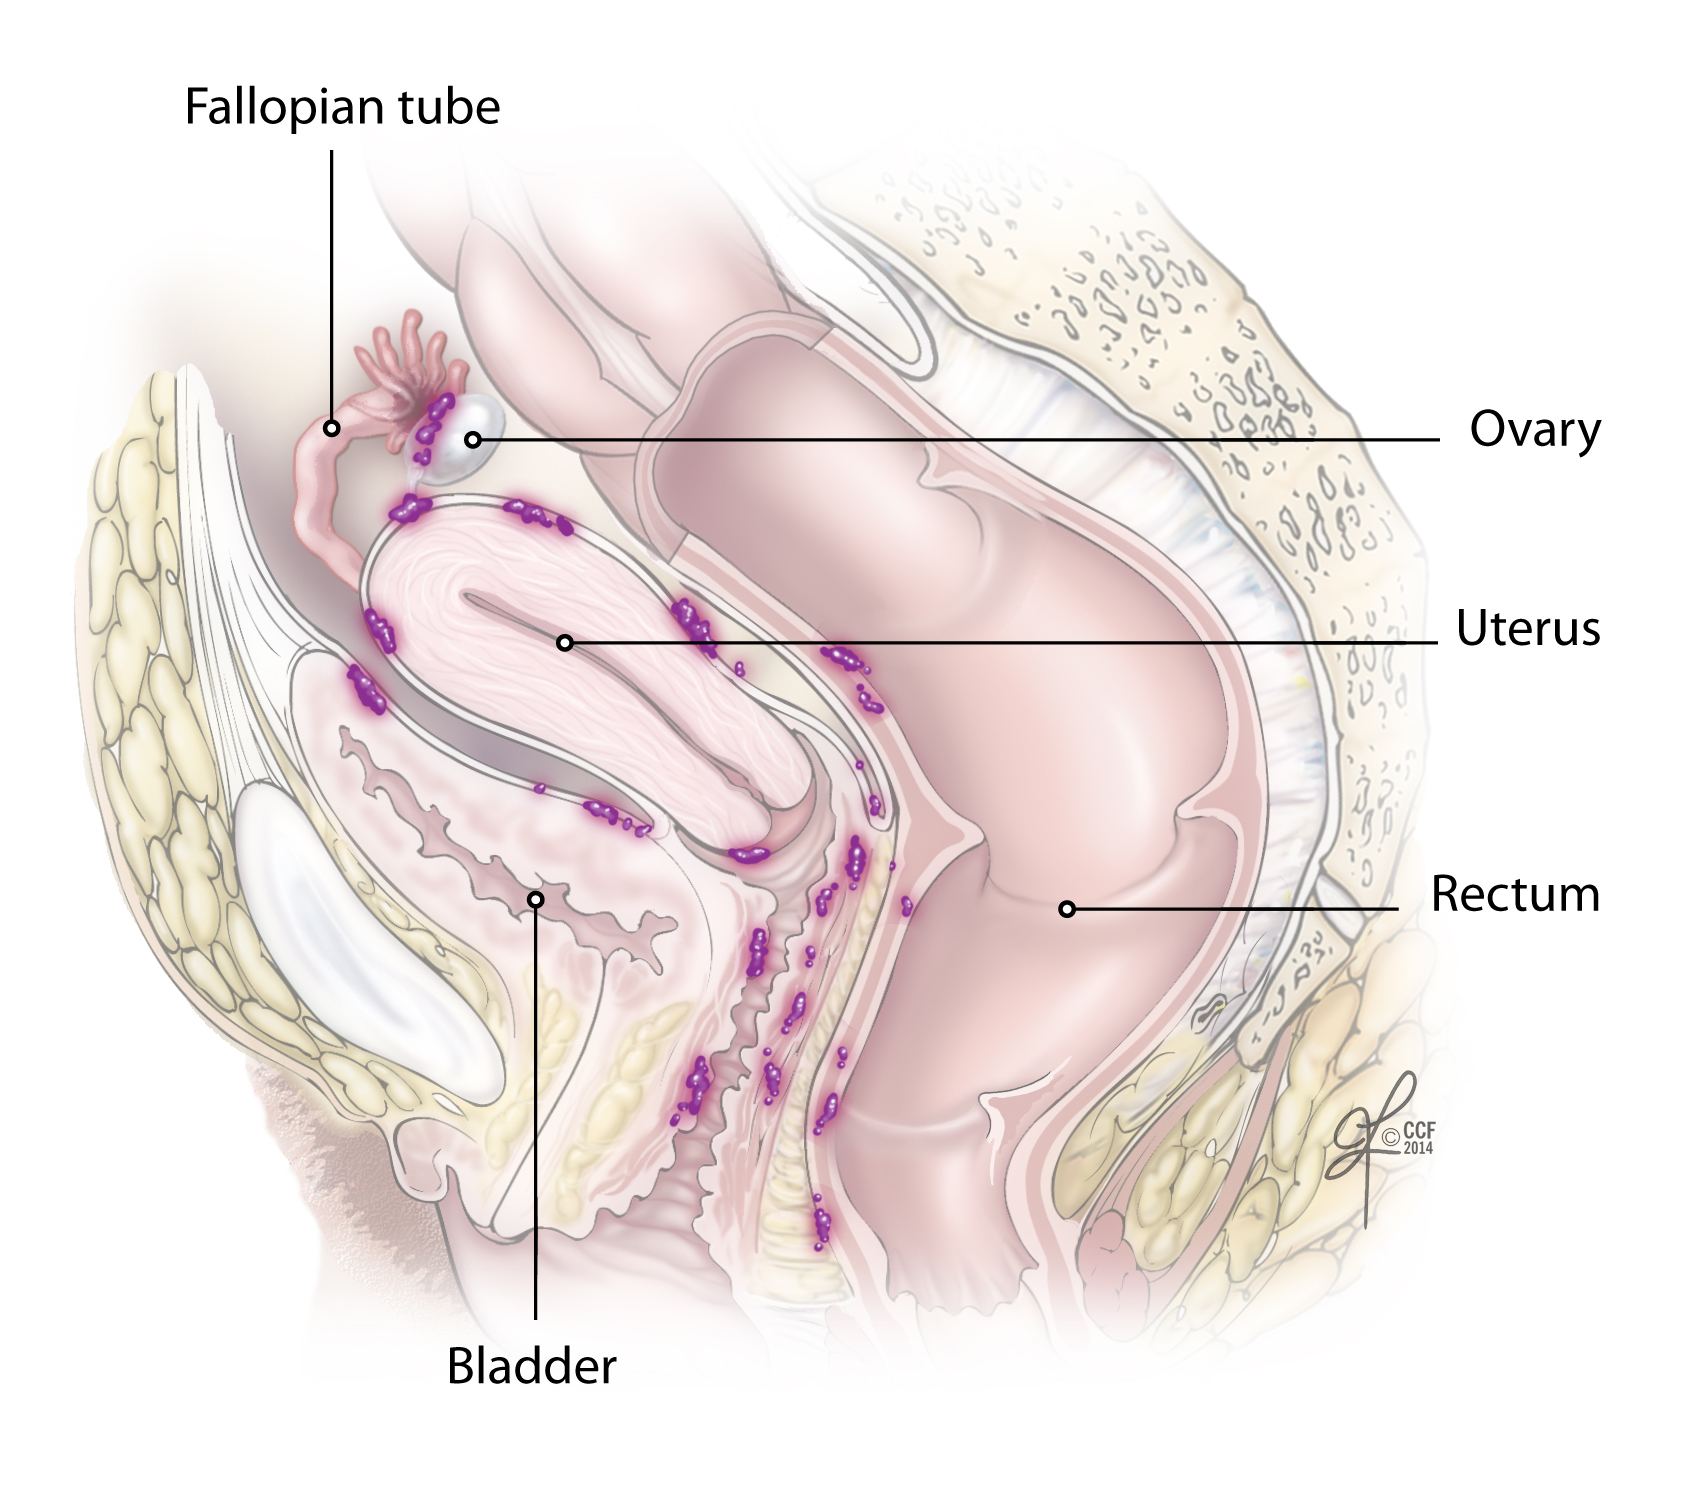 Figure 2. Ovarian cancer spreads along the peritoneal surfaces of the abdomen and pelvis, thus cytoreductive surgery often involves organs beyond the reproductive system. 